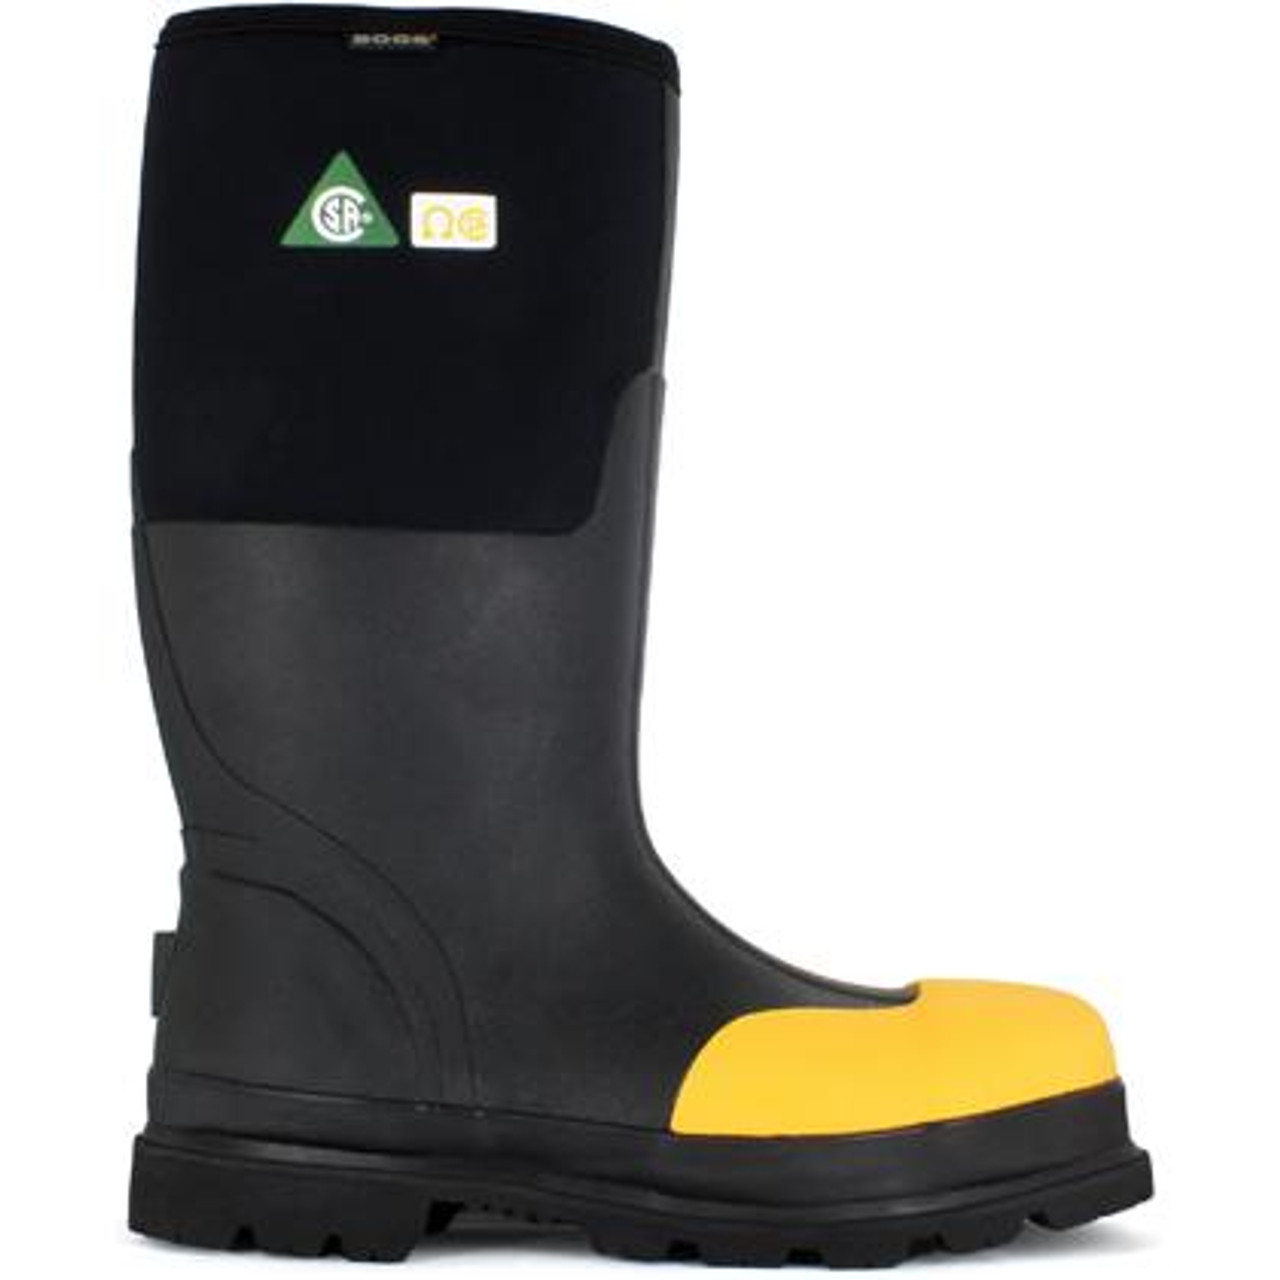 Bogs CSA Rancher Rubber Safety Boot 